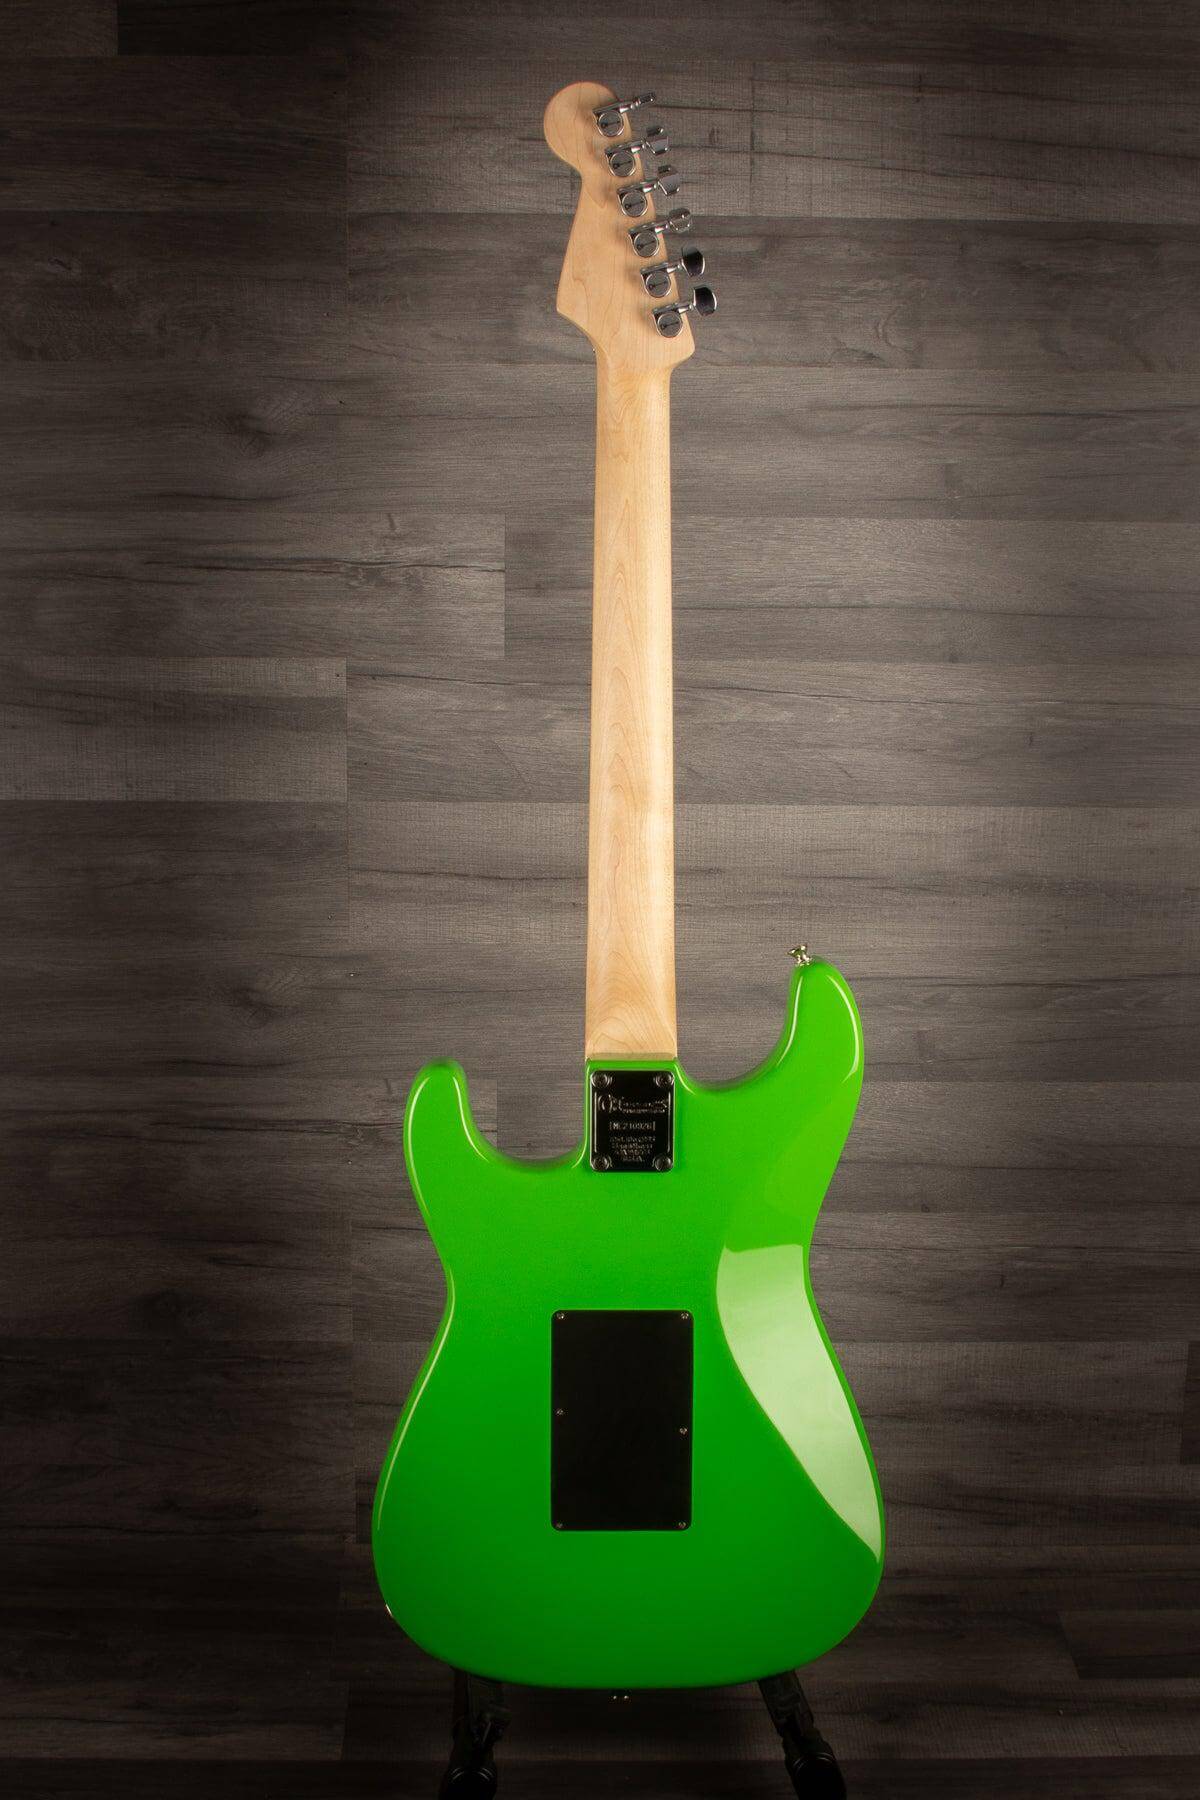 USED - Charvel Pro-Mod So-Cal Style 1 HSH FR M, Maple Fingerboard, Slime Green - MusicStreet